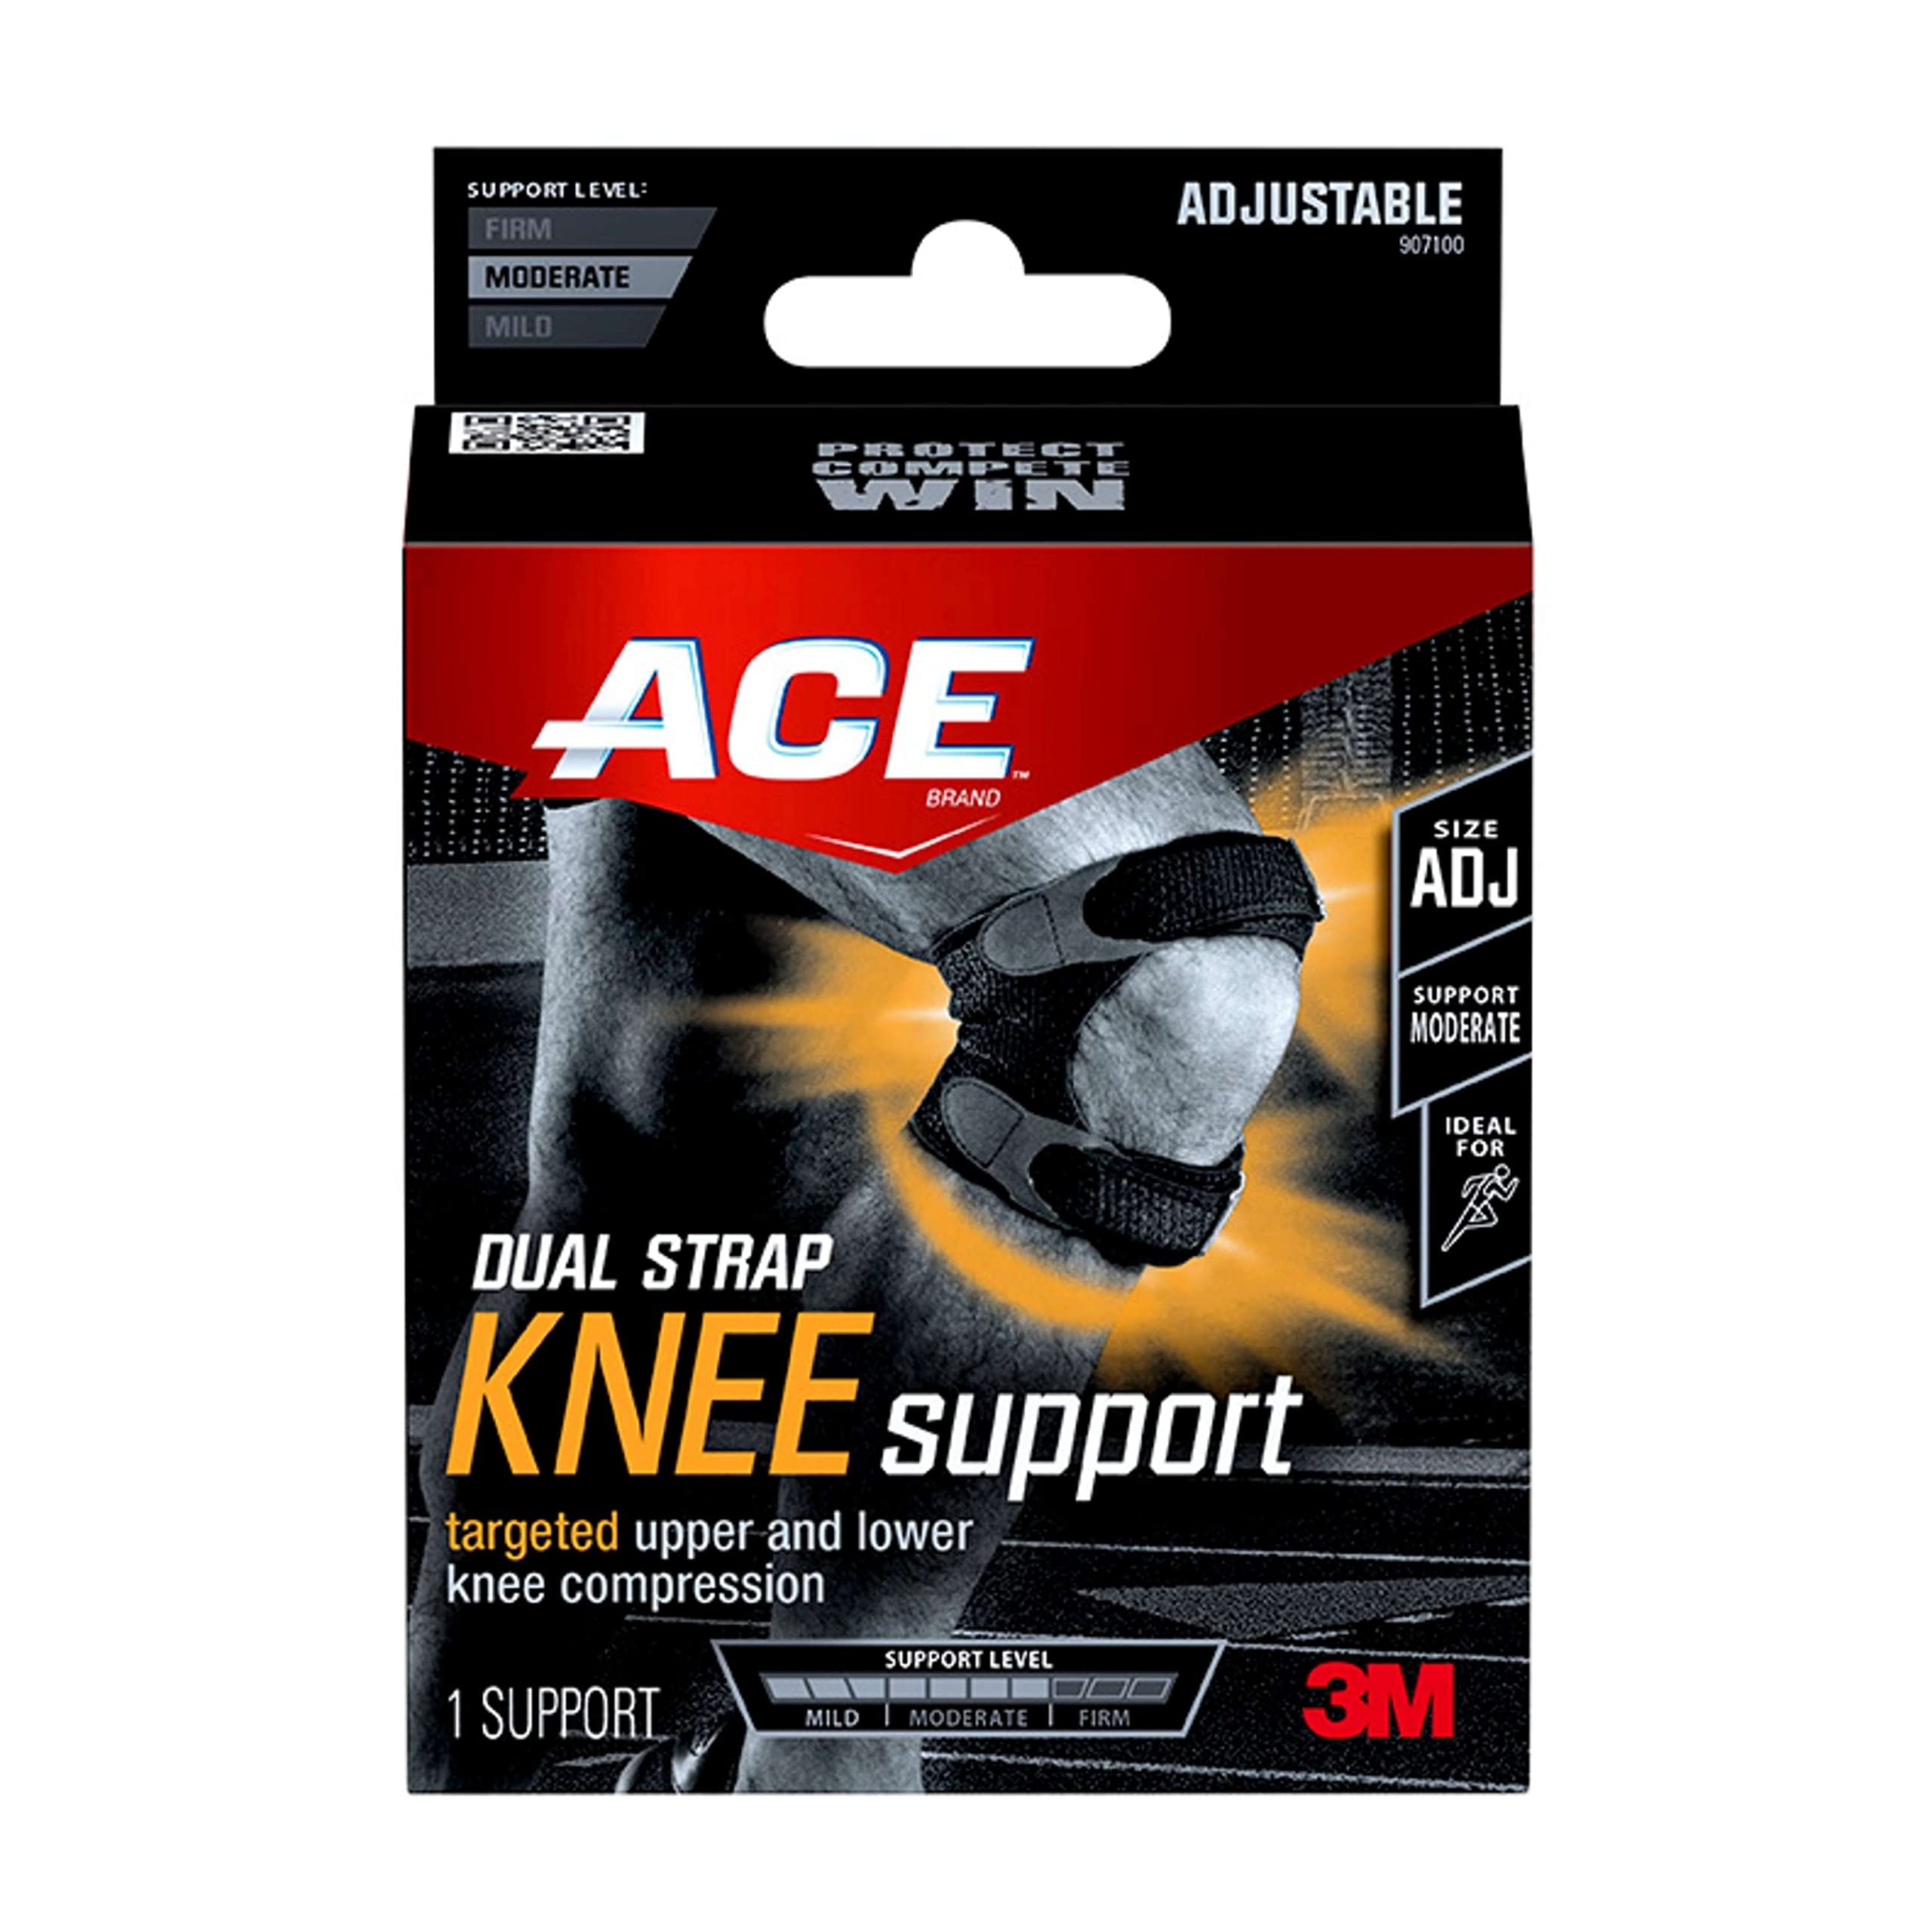 ACE™ Brand Compression Elbow Sleeve with Pad